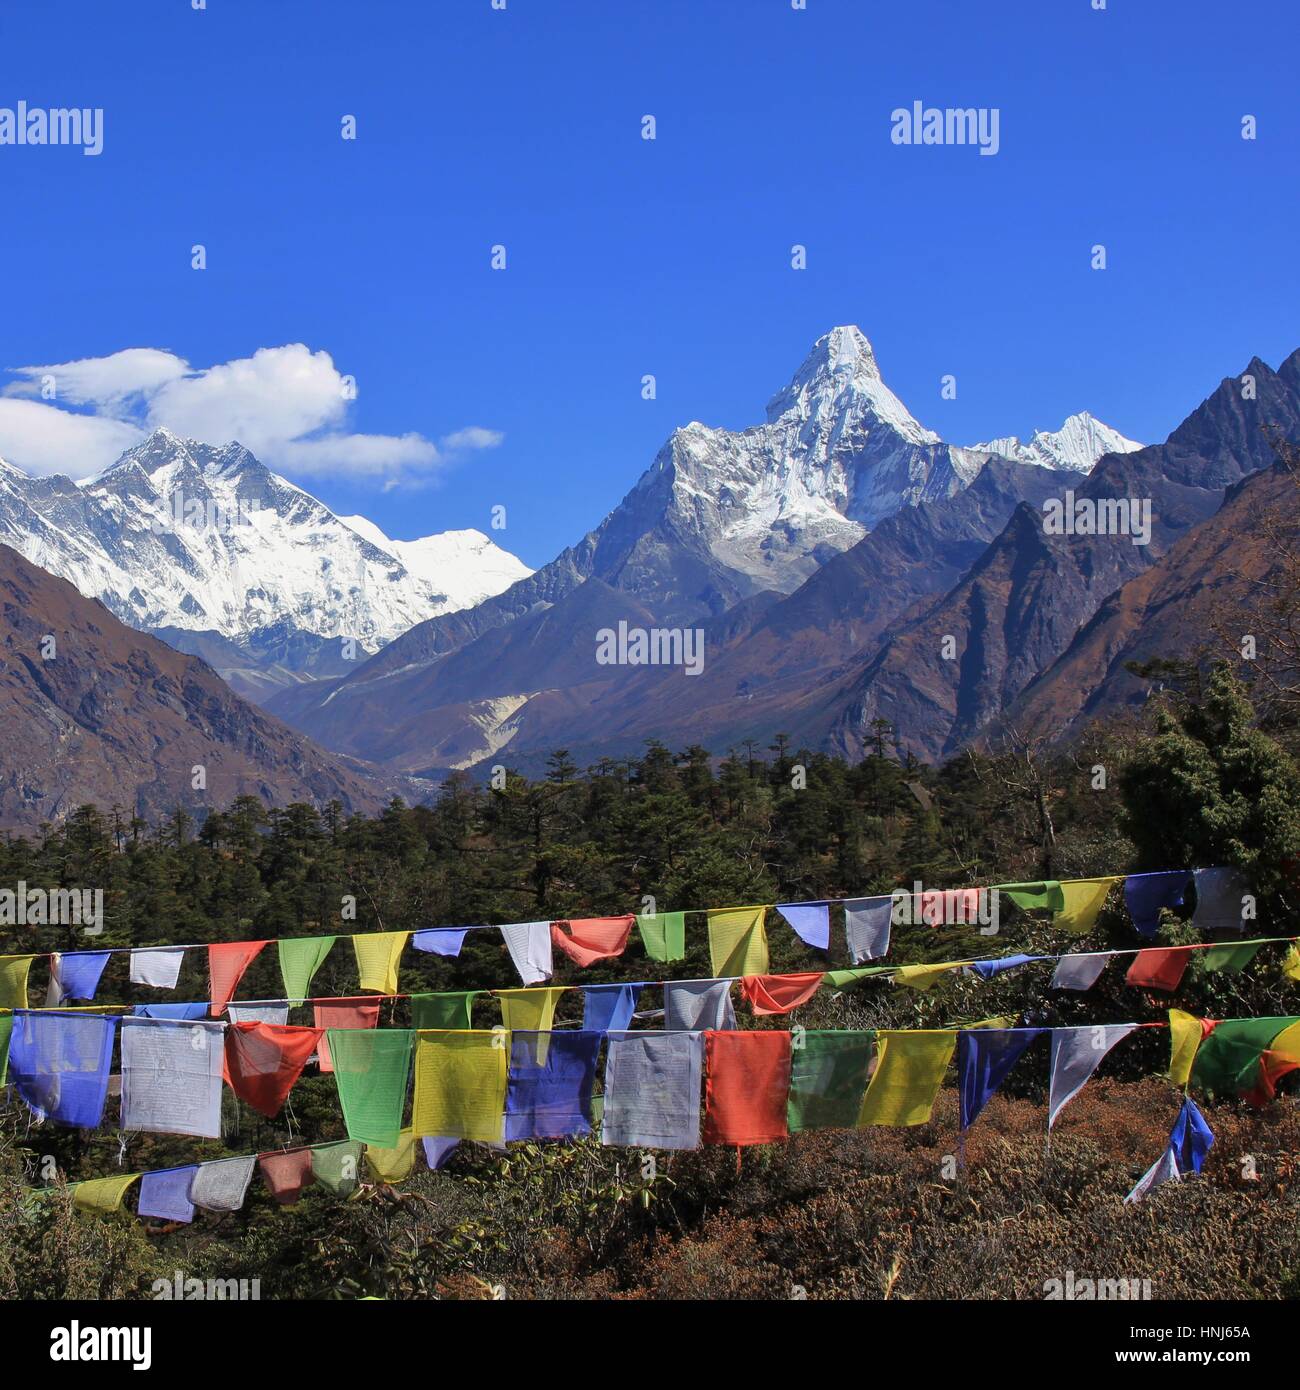 Autumn day in the Everest National Park. Snow capped mountains Lhotse and Ama Dablam. Prayer flags. Stock Photo